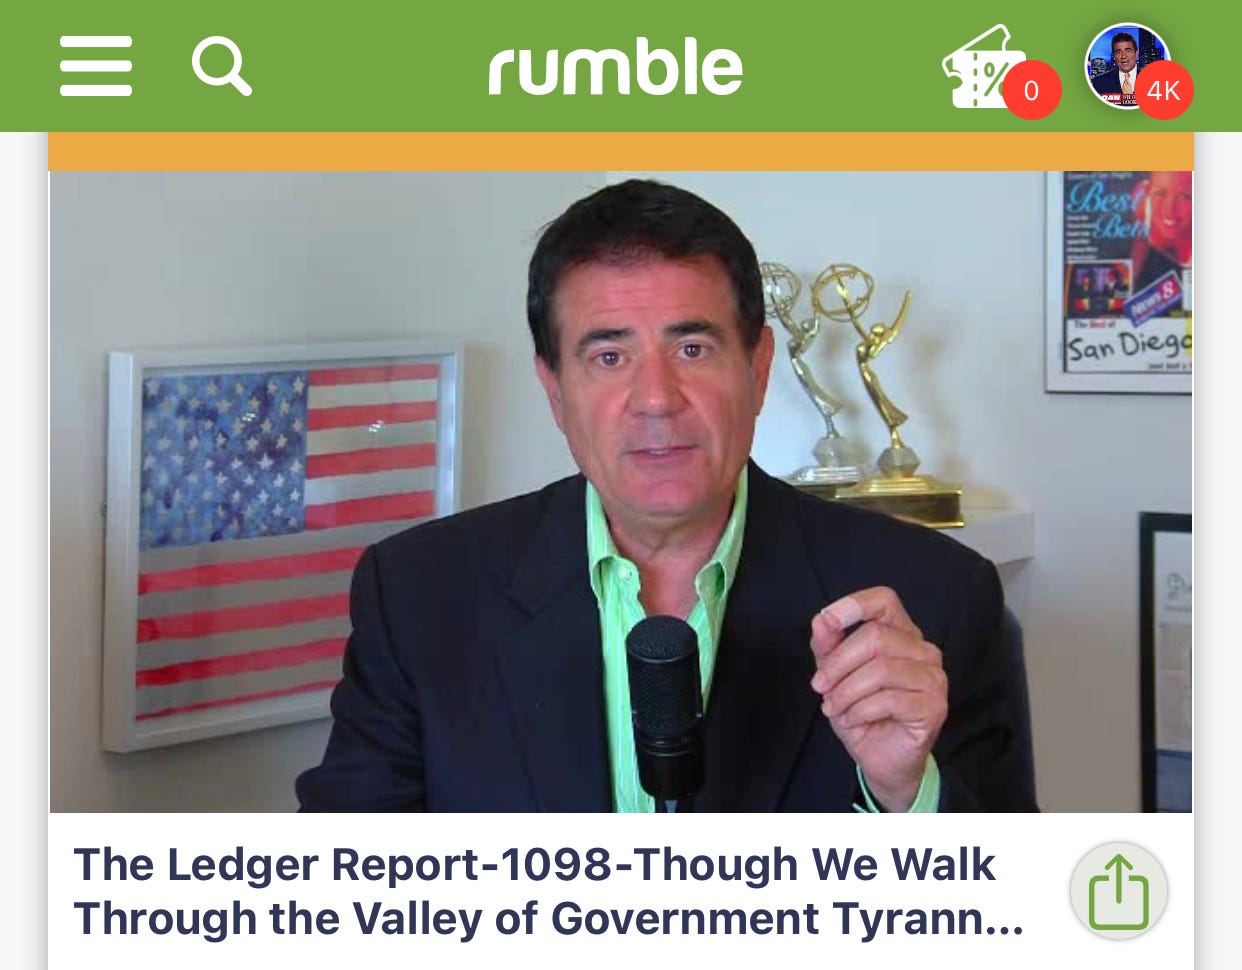 https://rumble.com/vd92xl-the-ledger-report-1098-though-we-walk-through-the-valley-of-government-tyra.html